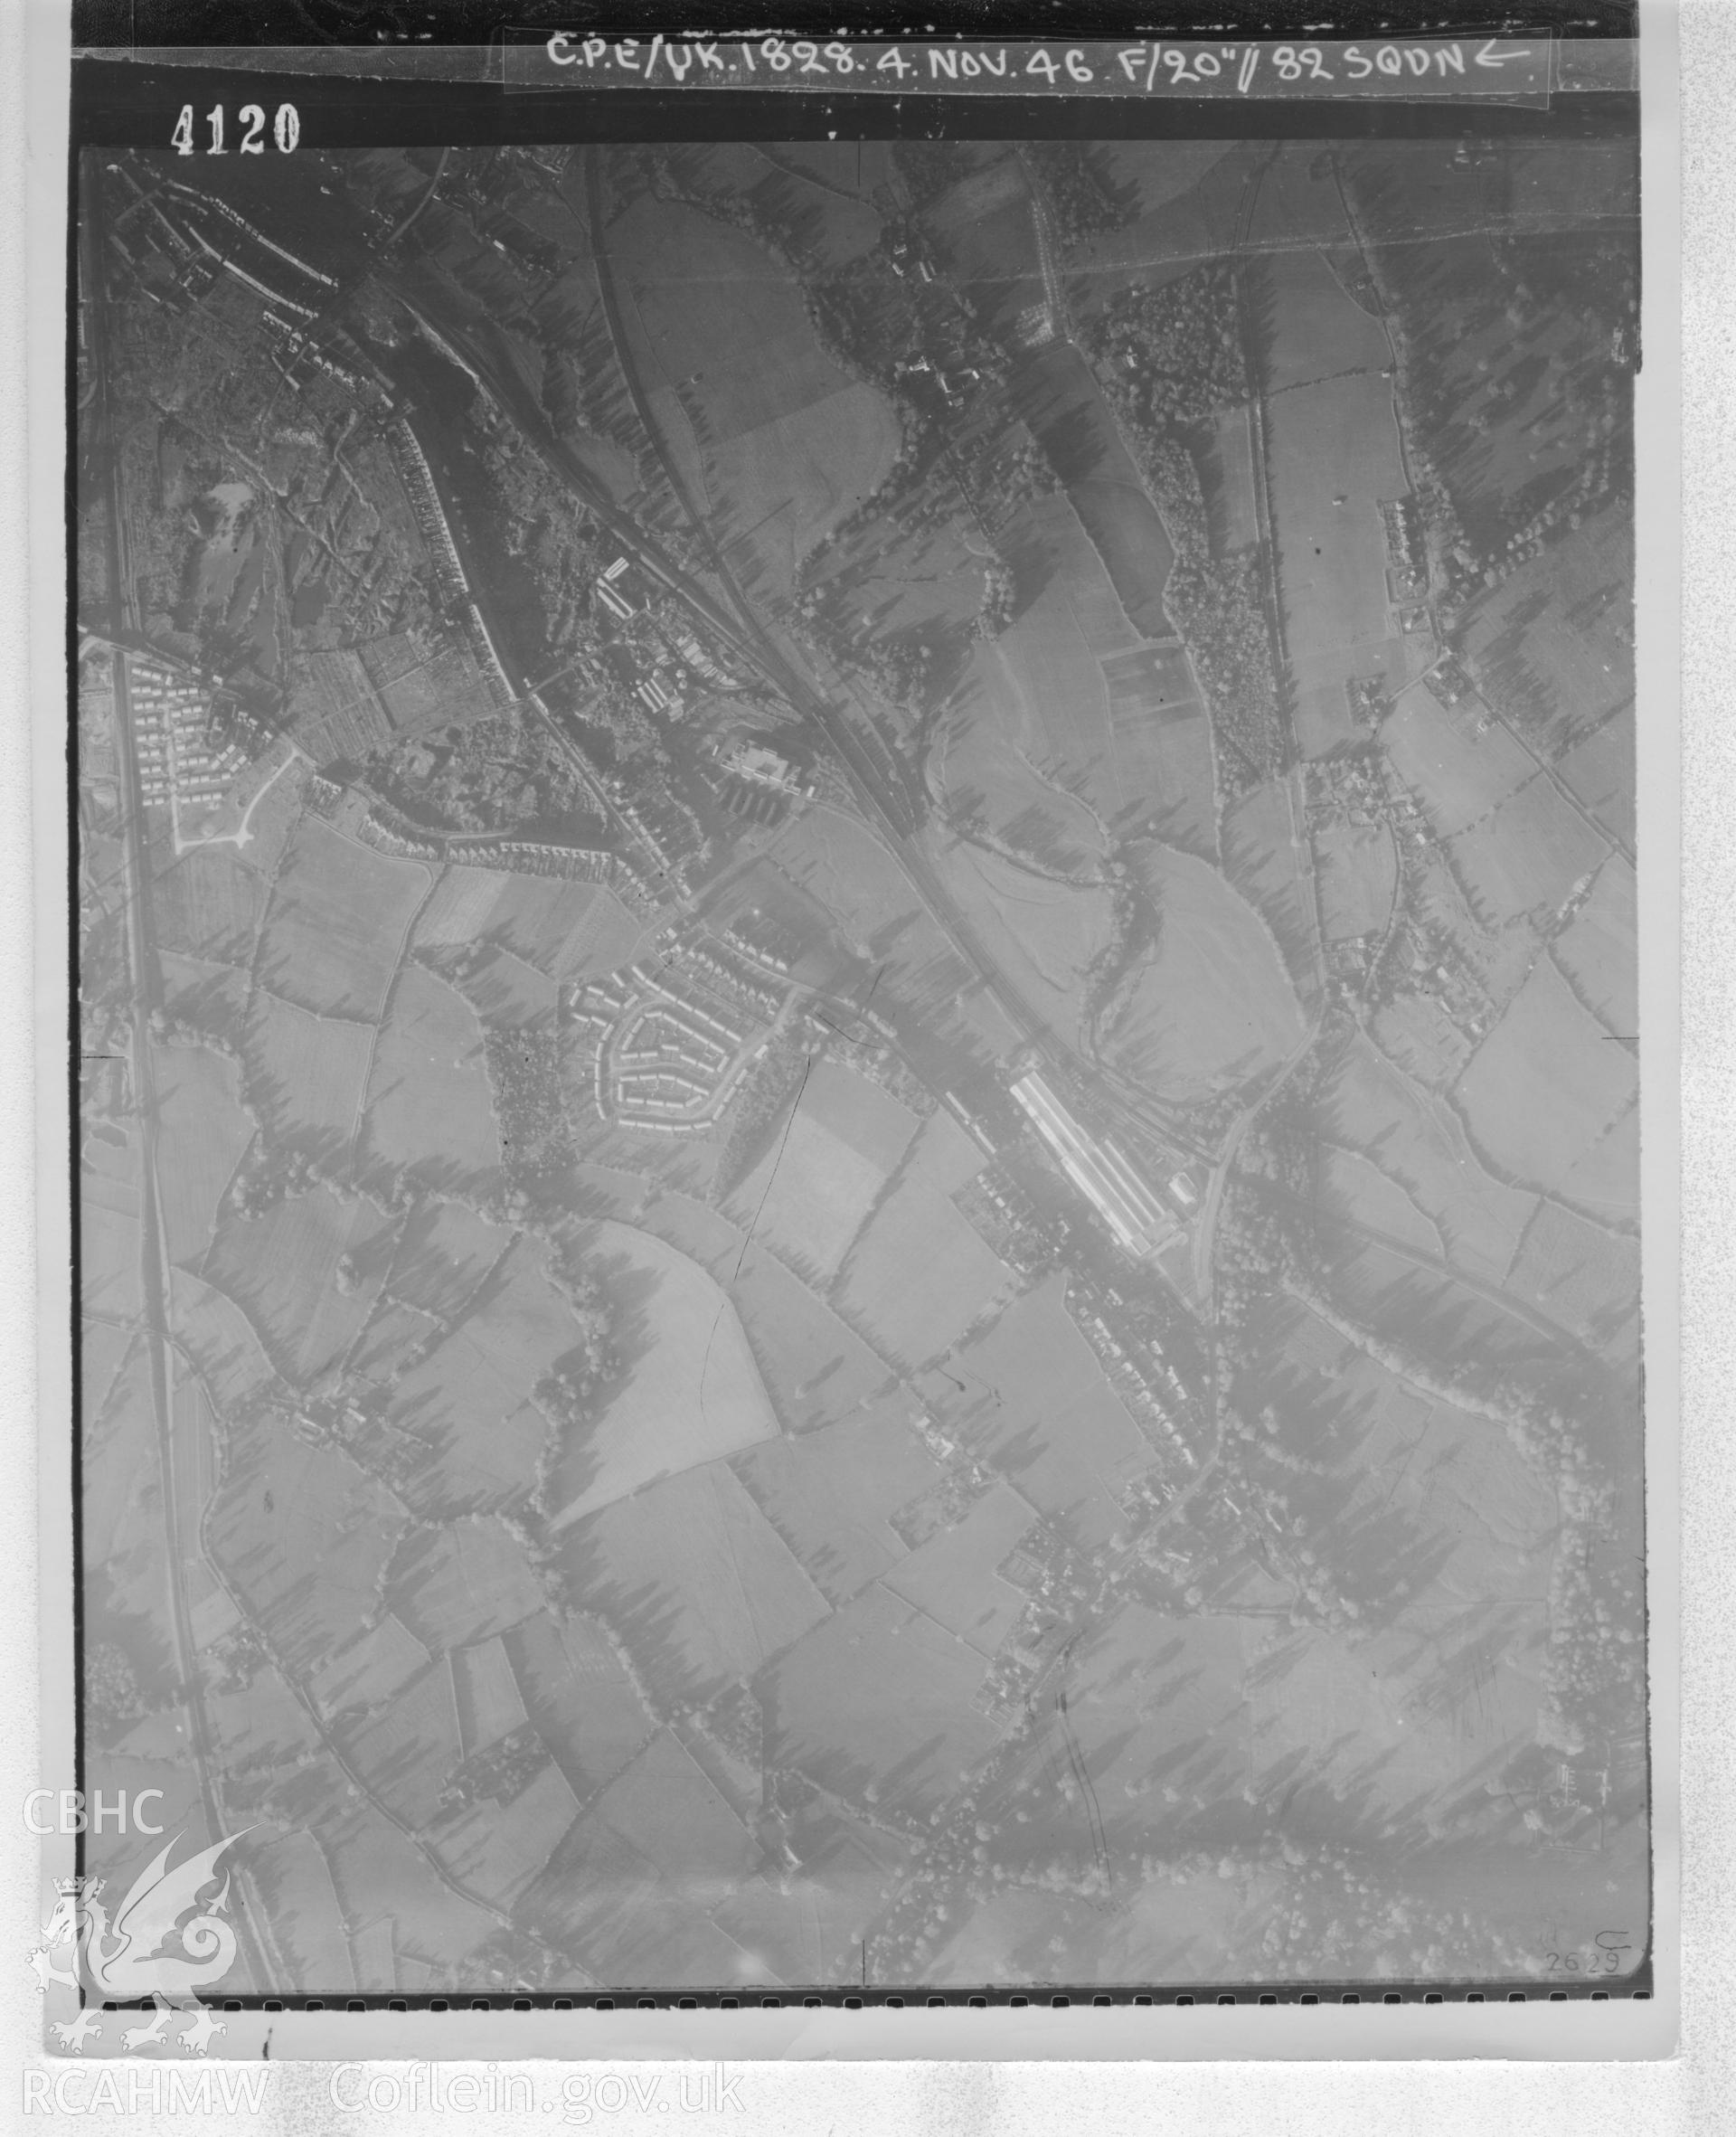 Aerial photograph of Cwmbran, taken on 4th November 1946. Included as part of Archaeology Wales' desk based assessment of former Llantarnam Community Primary School, Croeswen, Oakfield, Cwmbran, conducted in 2017.